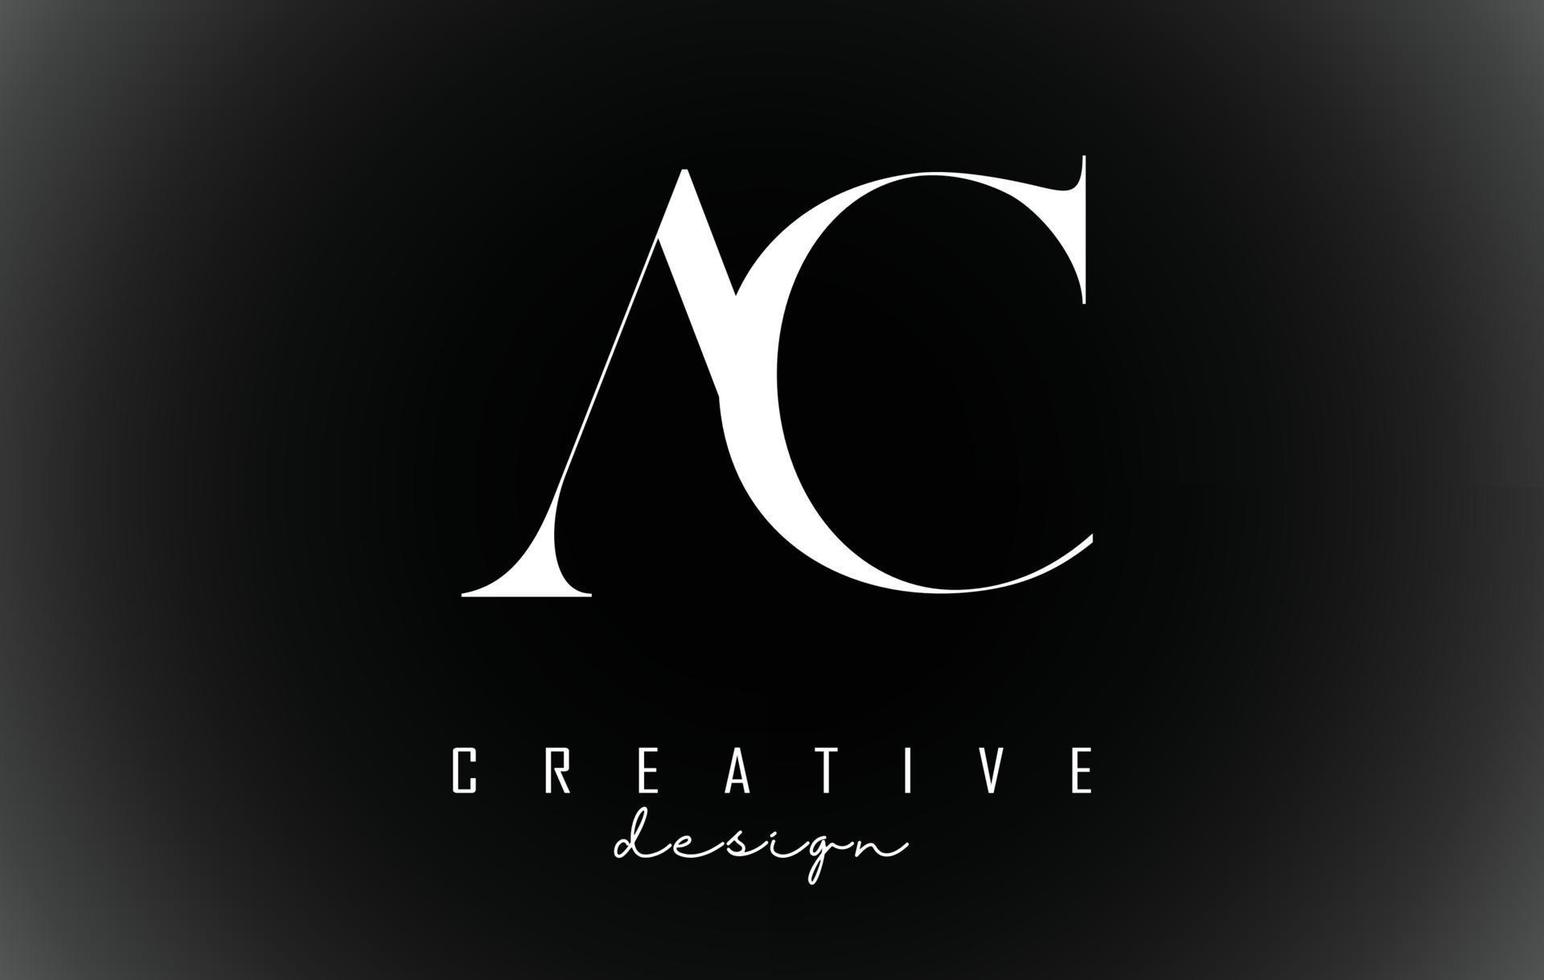 White AC a c letters design logotype concept with serif font and elegant style vector illustration.